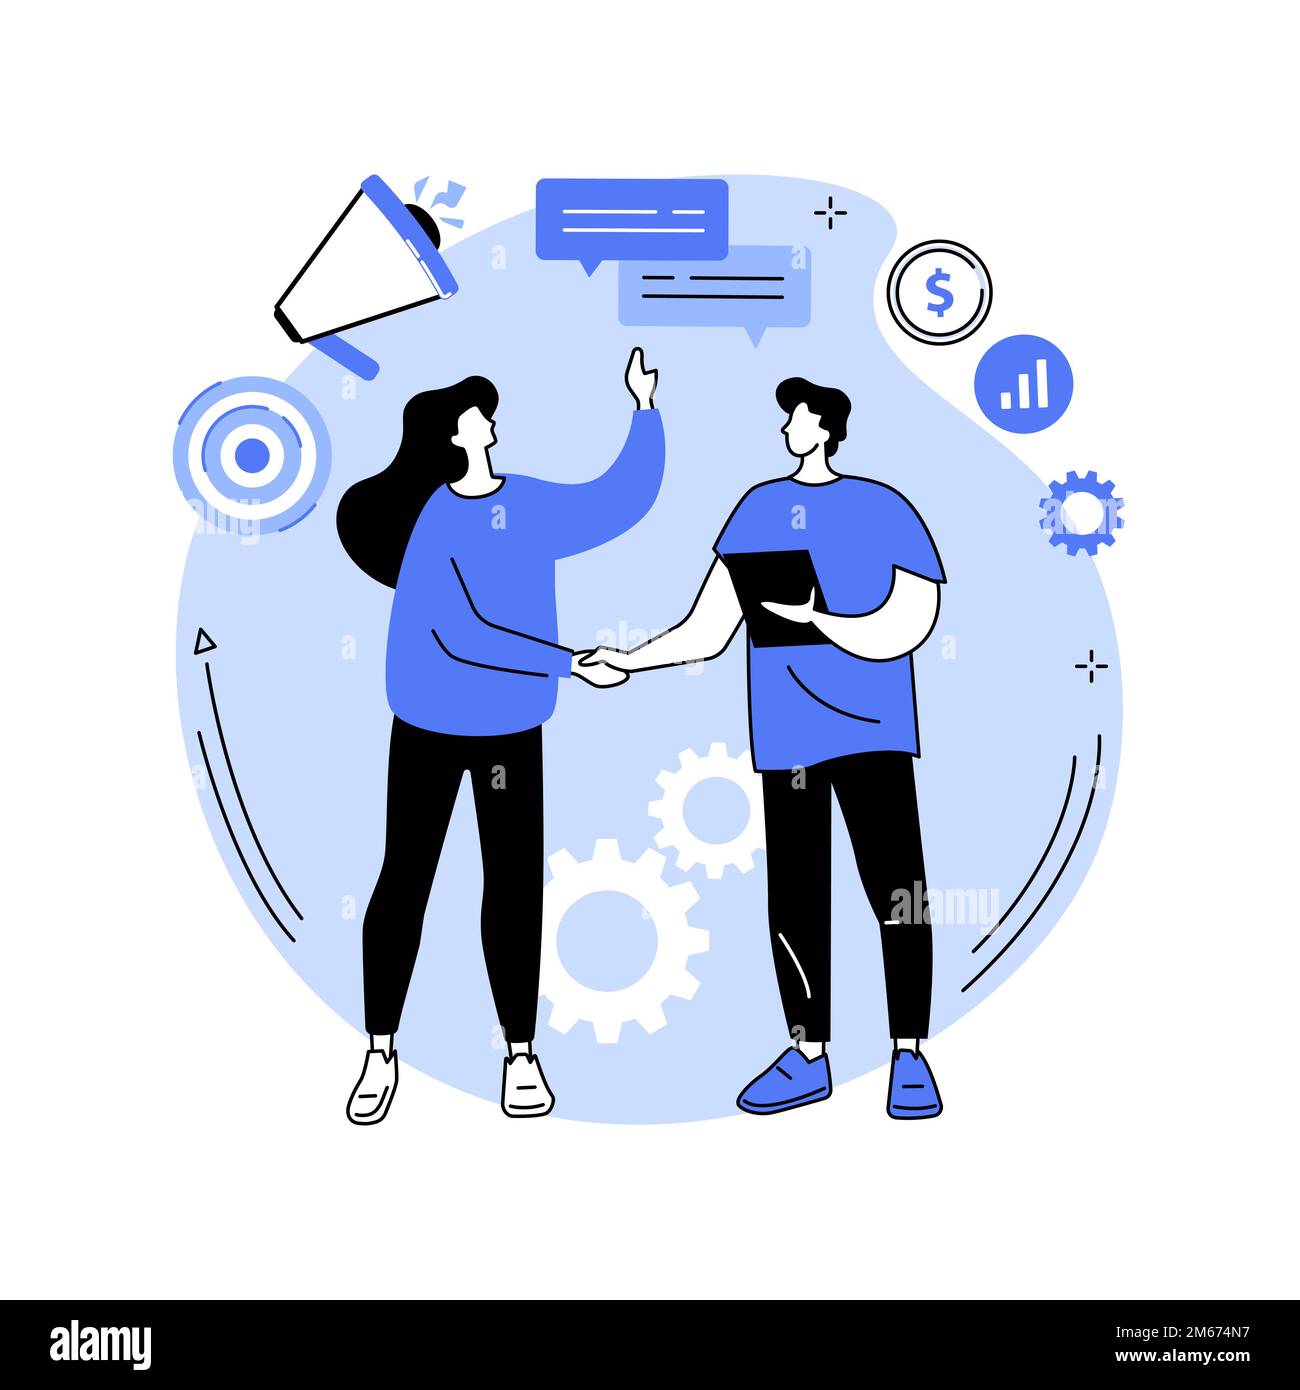 Relationship marketing abstract concept vector illustration. Customer relationship strategy, focus on consumer loyalty, brand interaction and long-ter Stock Vector